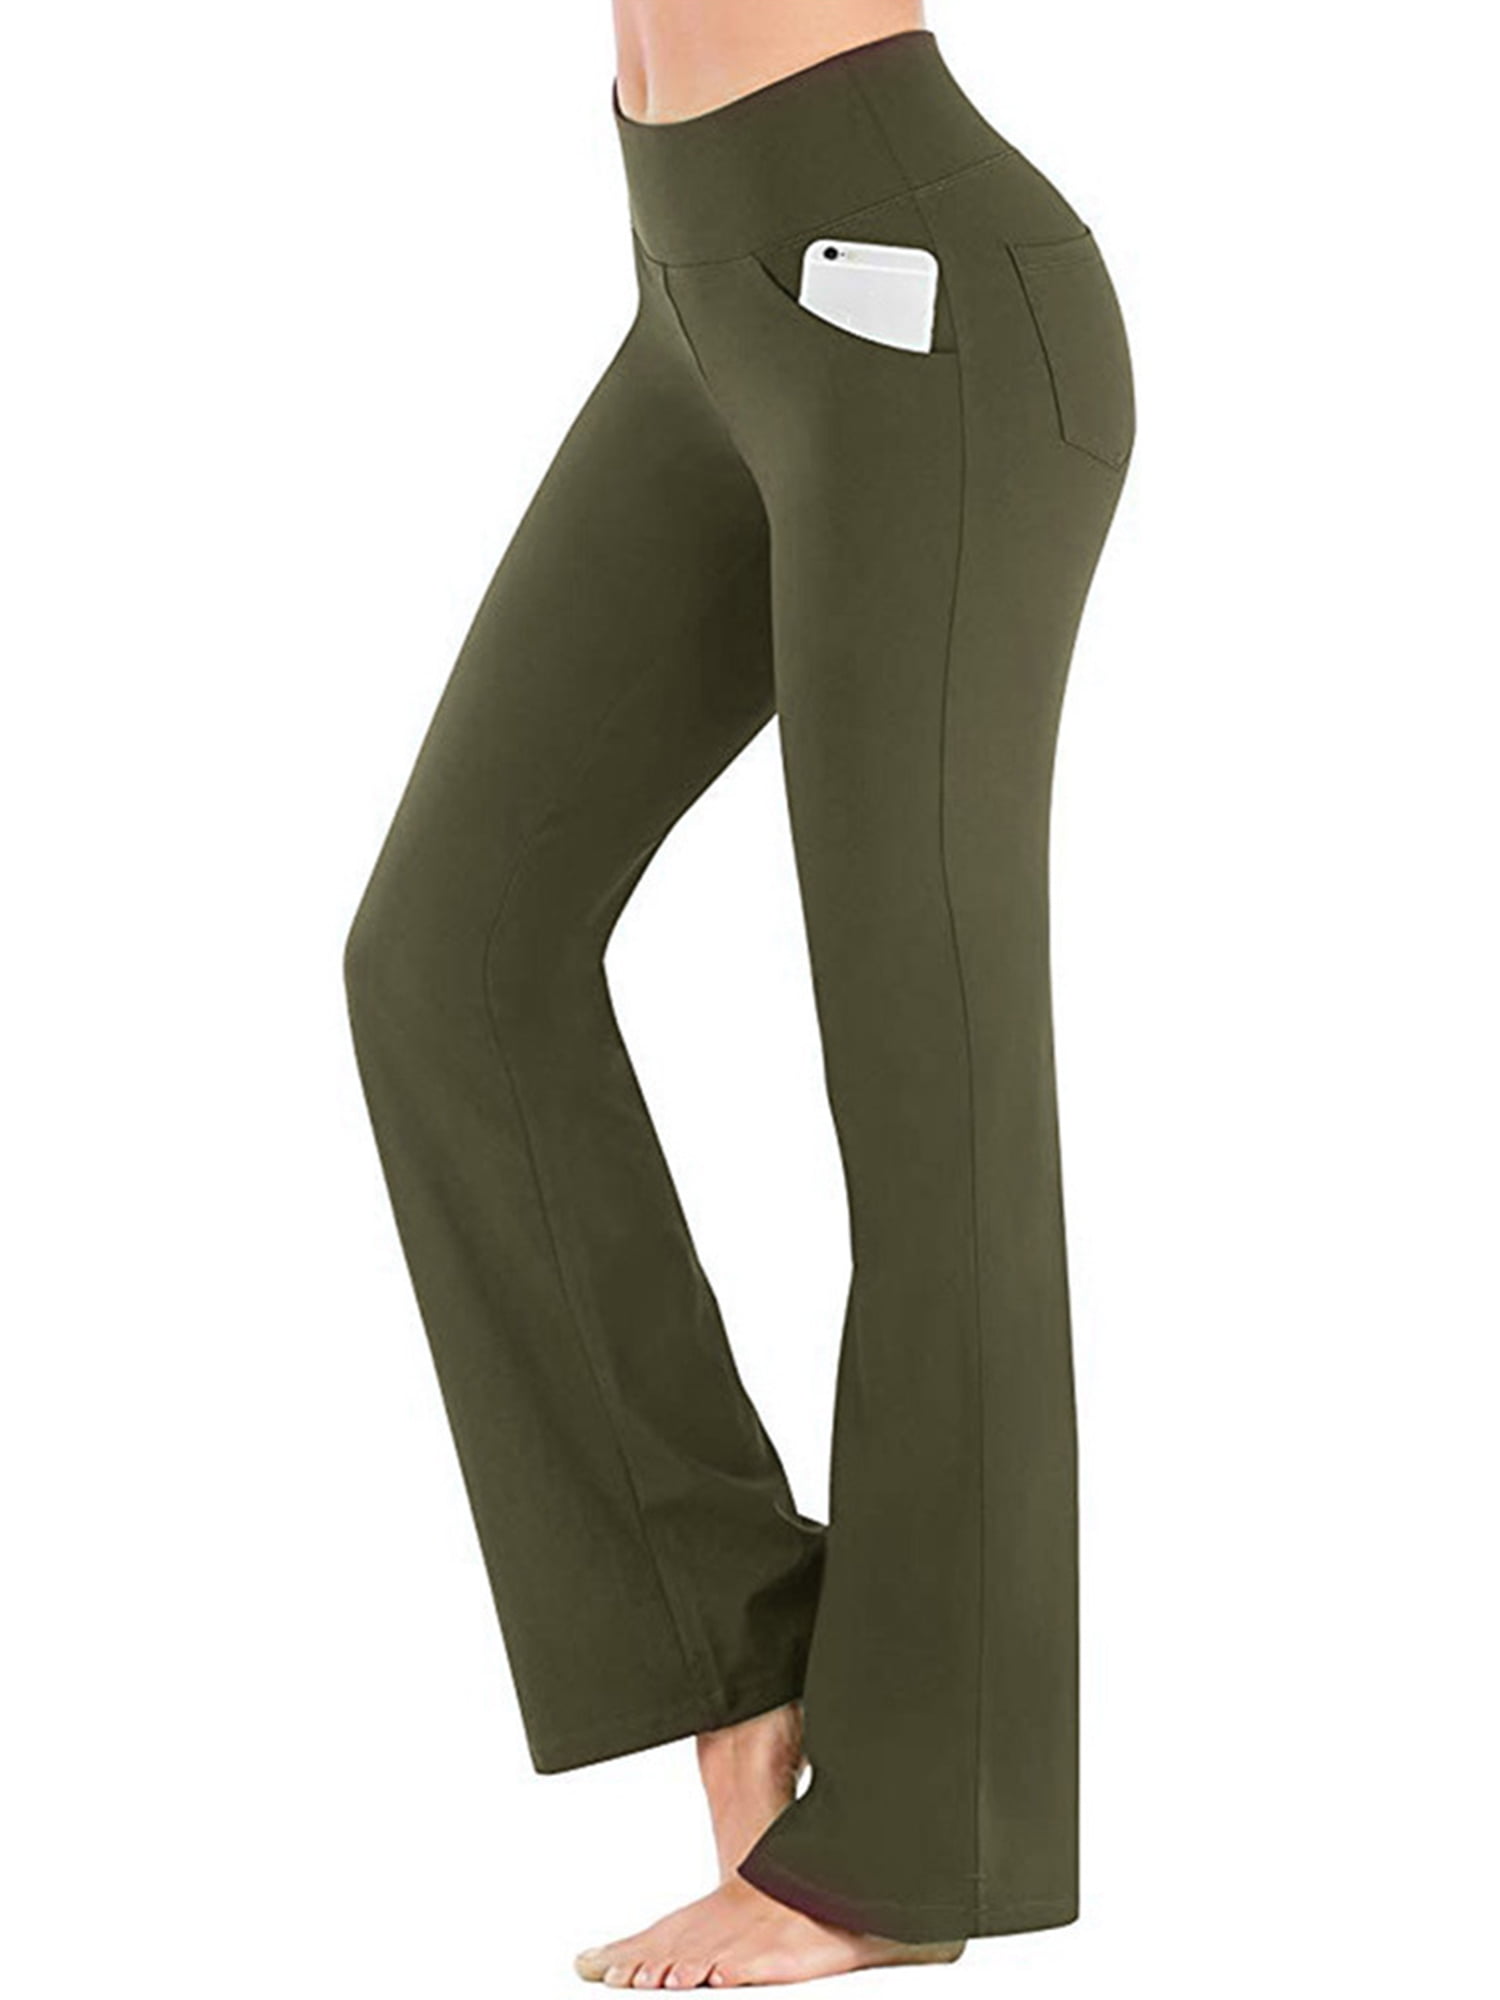 OUSITAID Bootcut Yoga Pants for Women Stretchy Work Business